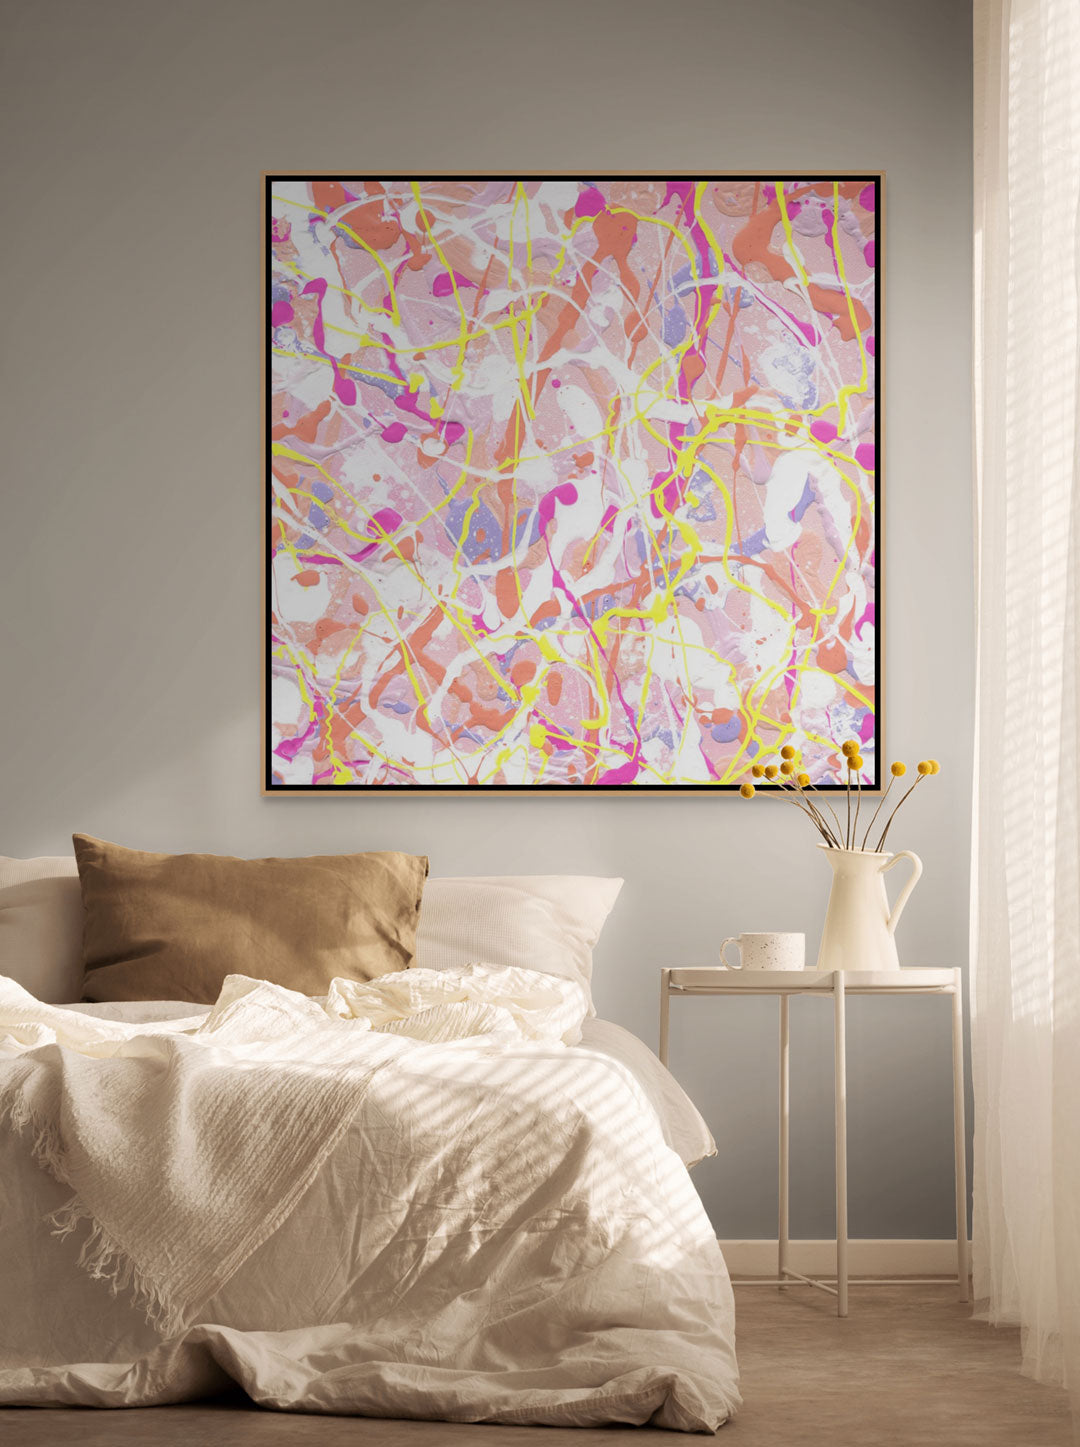 'Cupcake III' Fine Art Canvas Print framed in solid wood oak frame hand-cut and custom made in Australia, seen hanging above bed and side table. Learn more about these beautiful prints